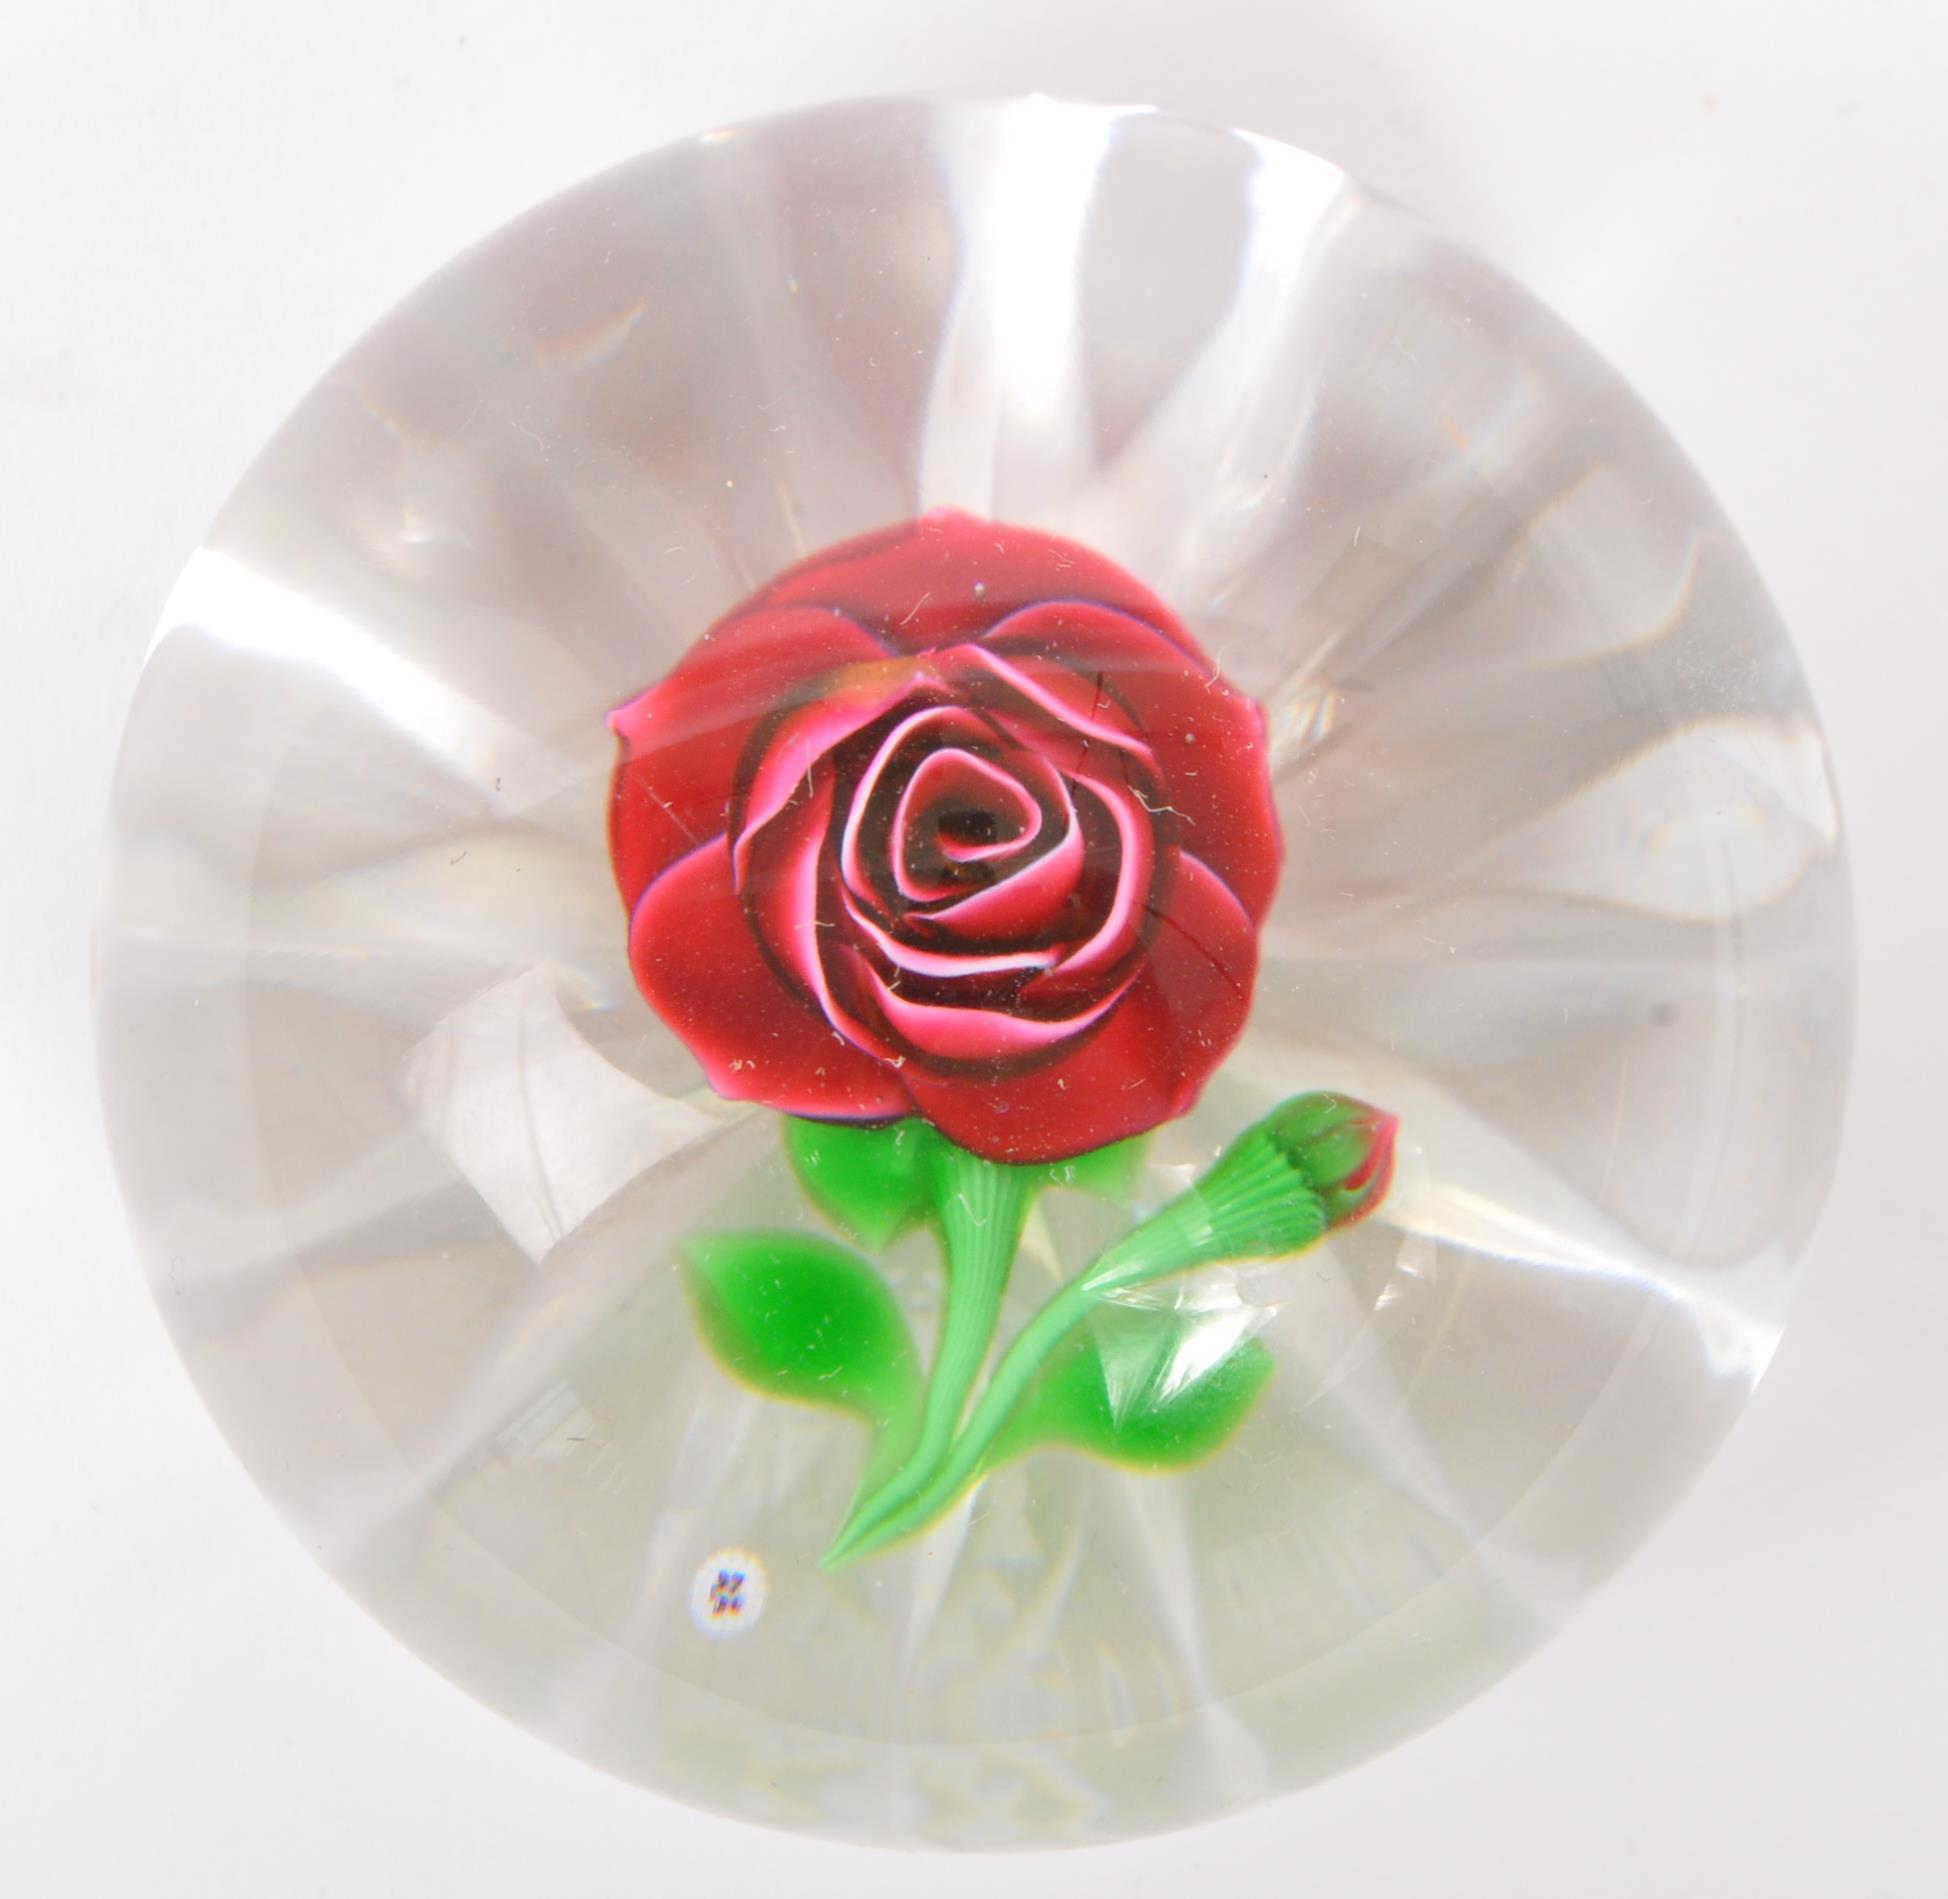 1976 BACCARAT FRENCH GLASS LAMPWORK ROSE PAPERWEIGHT